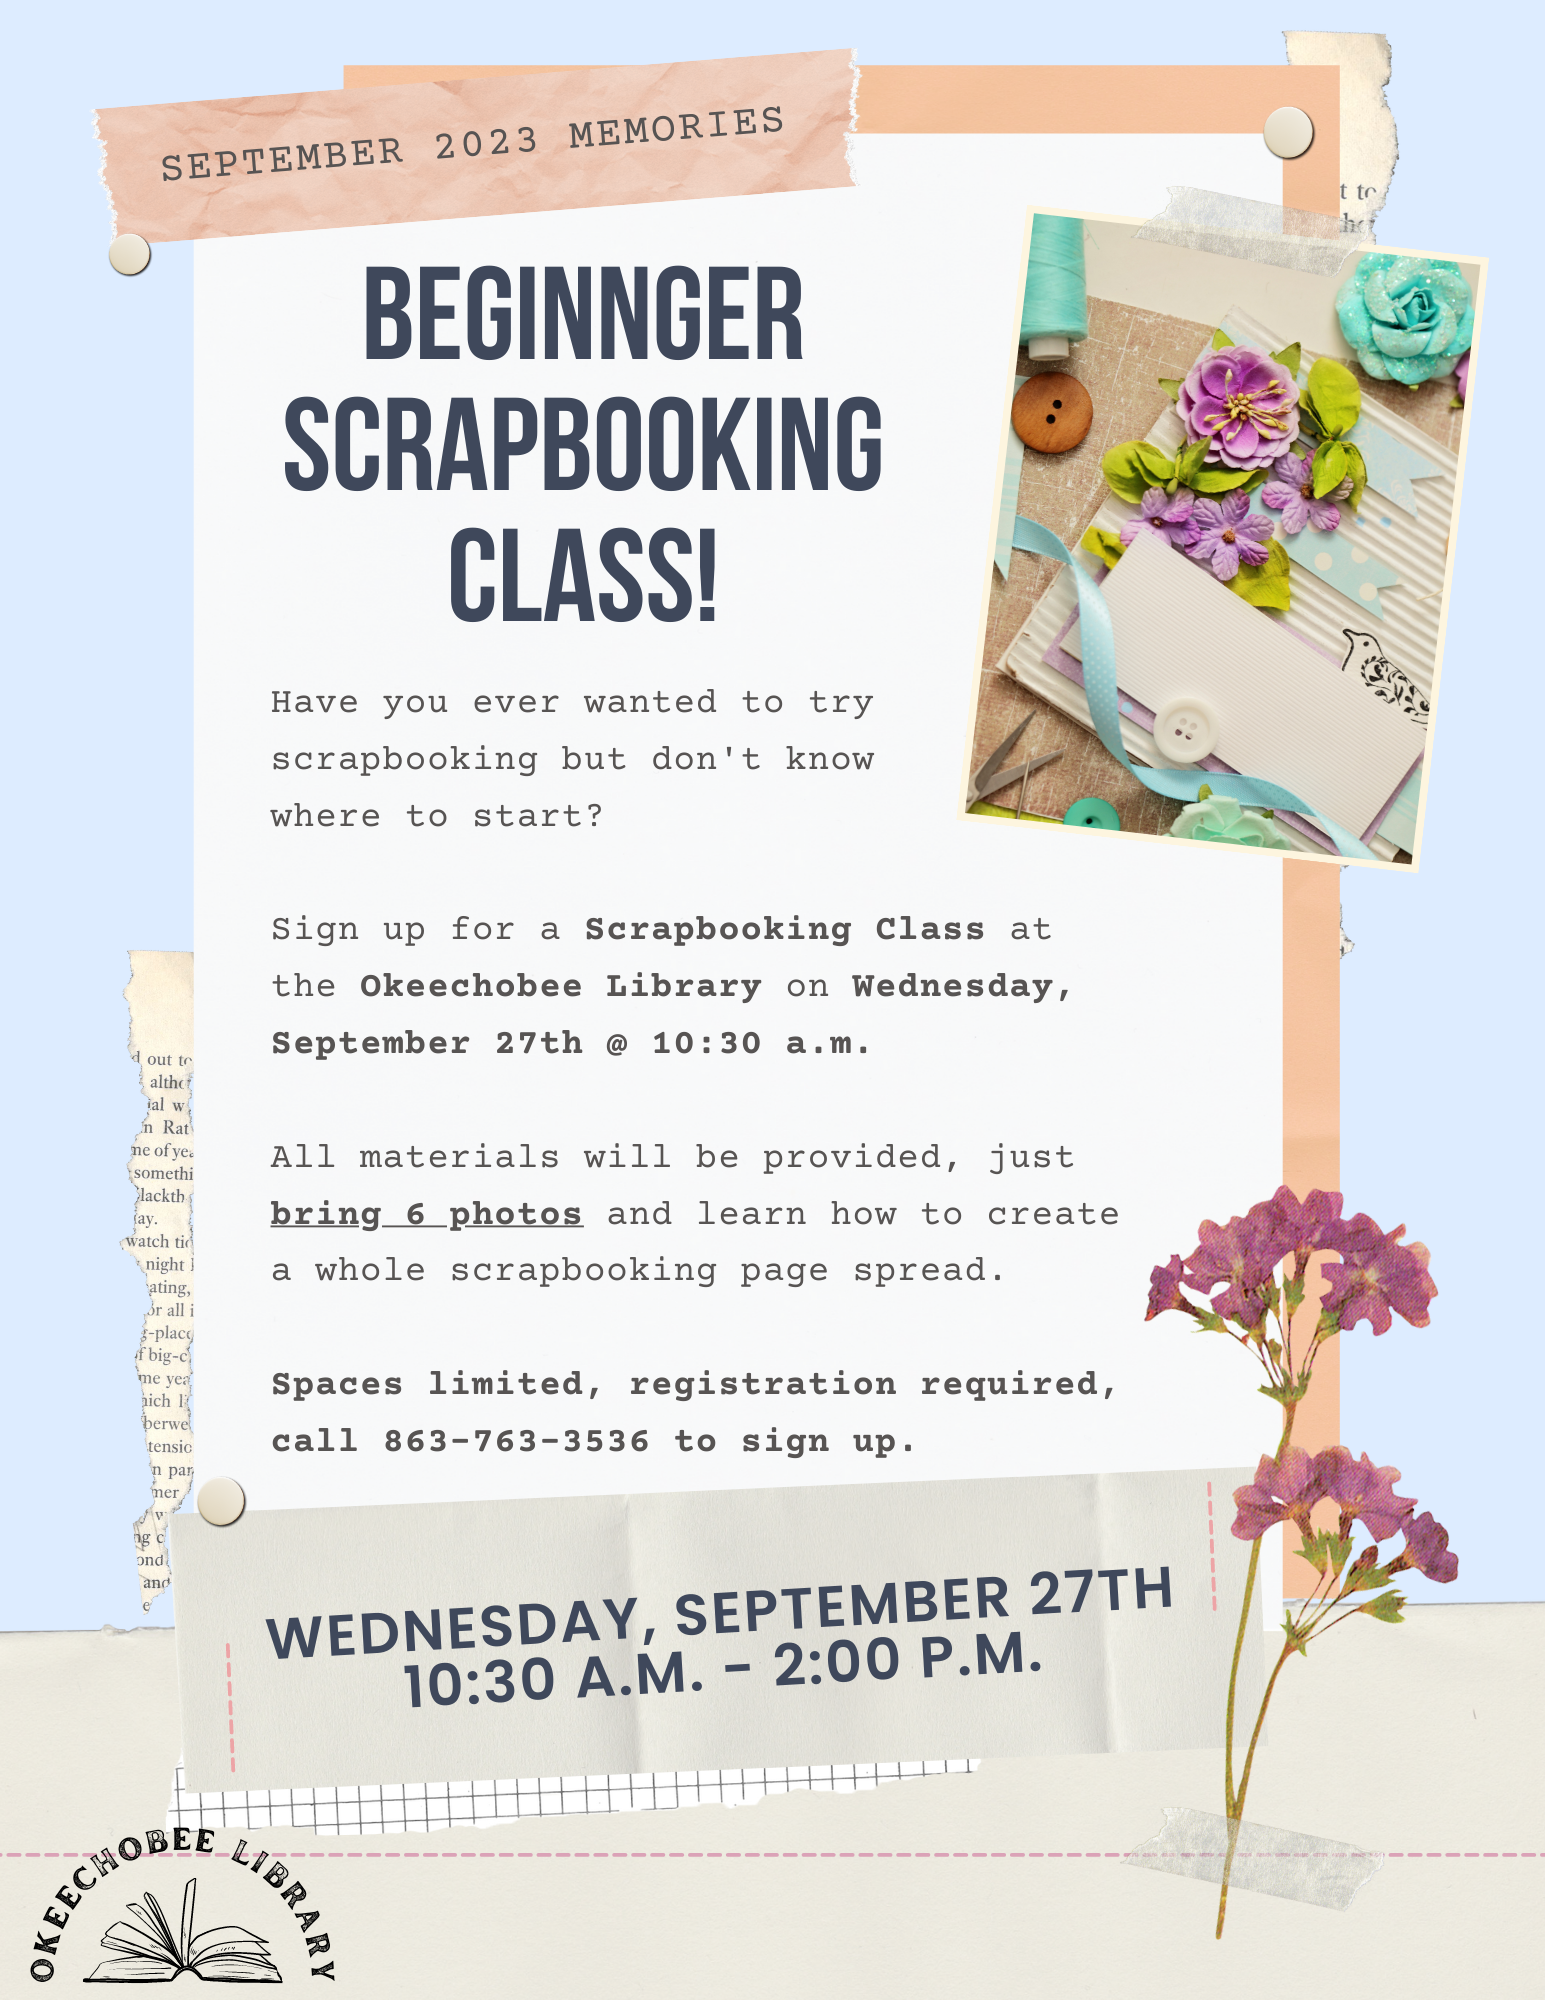 Have you ever wanted to try scrapbooking but don't know where to start? Sign up for a Scrapbooking Class at the Okeechobee Library on Wednesday, September 27th @ 10:30 a.m.